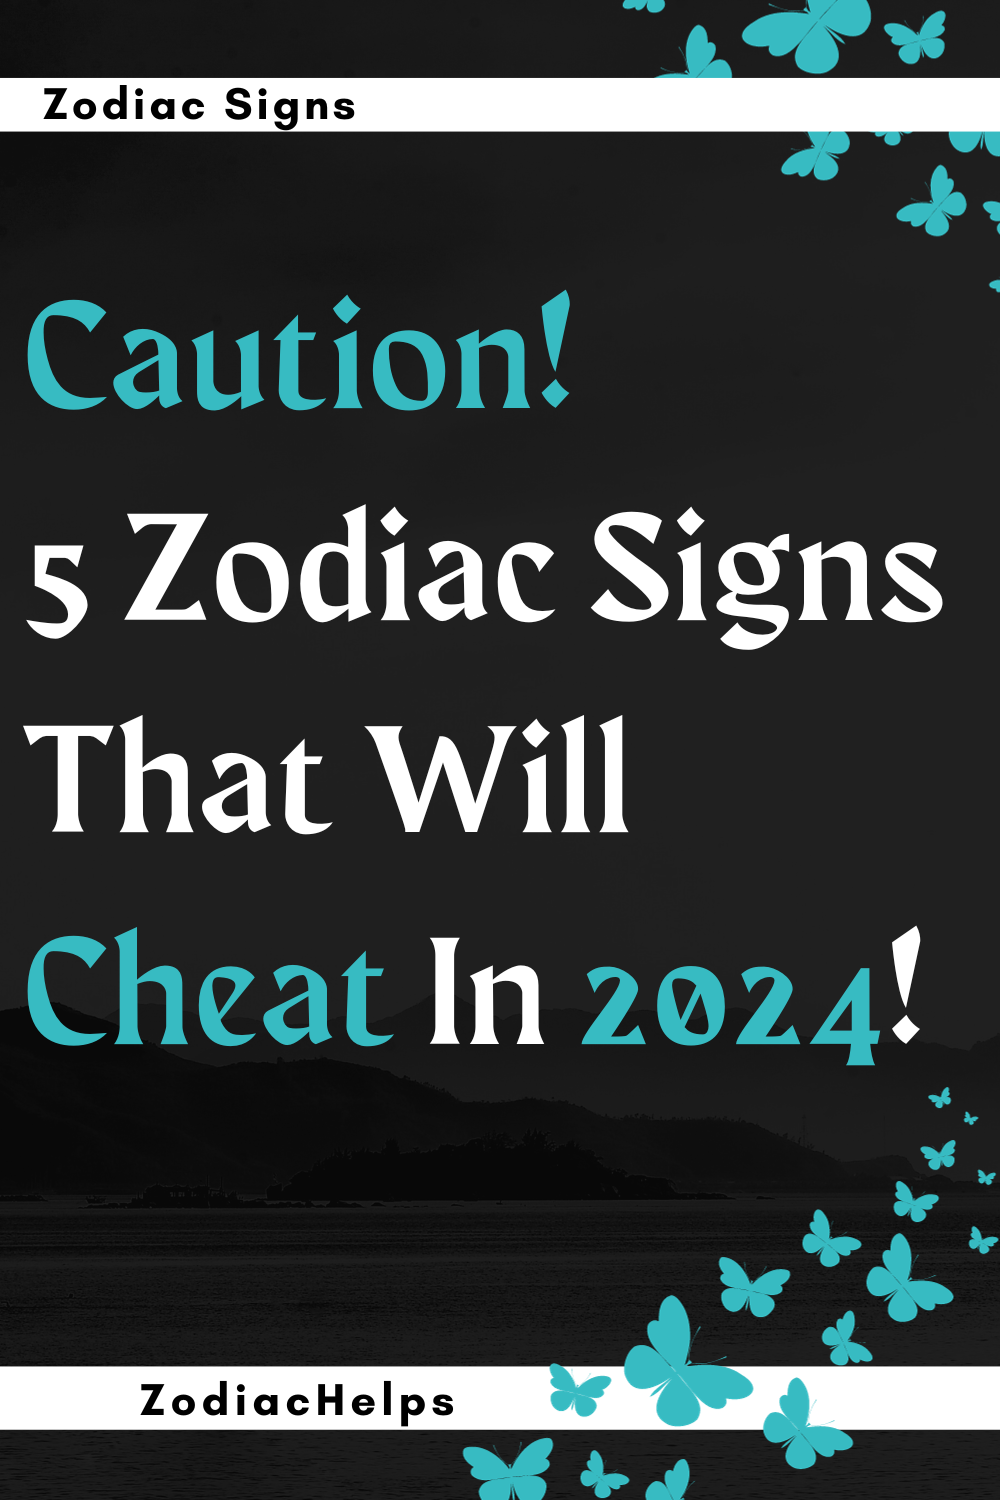 Caution! 5 Zodiac Signs That Will Cheat In 2024!